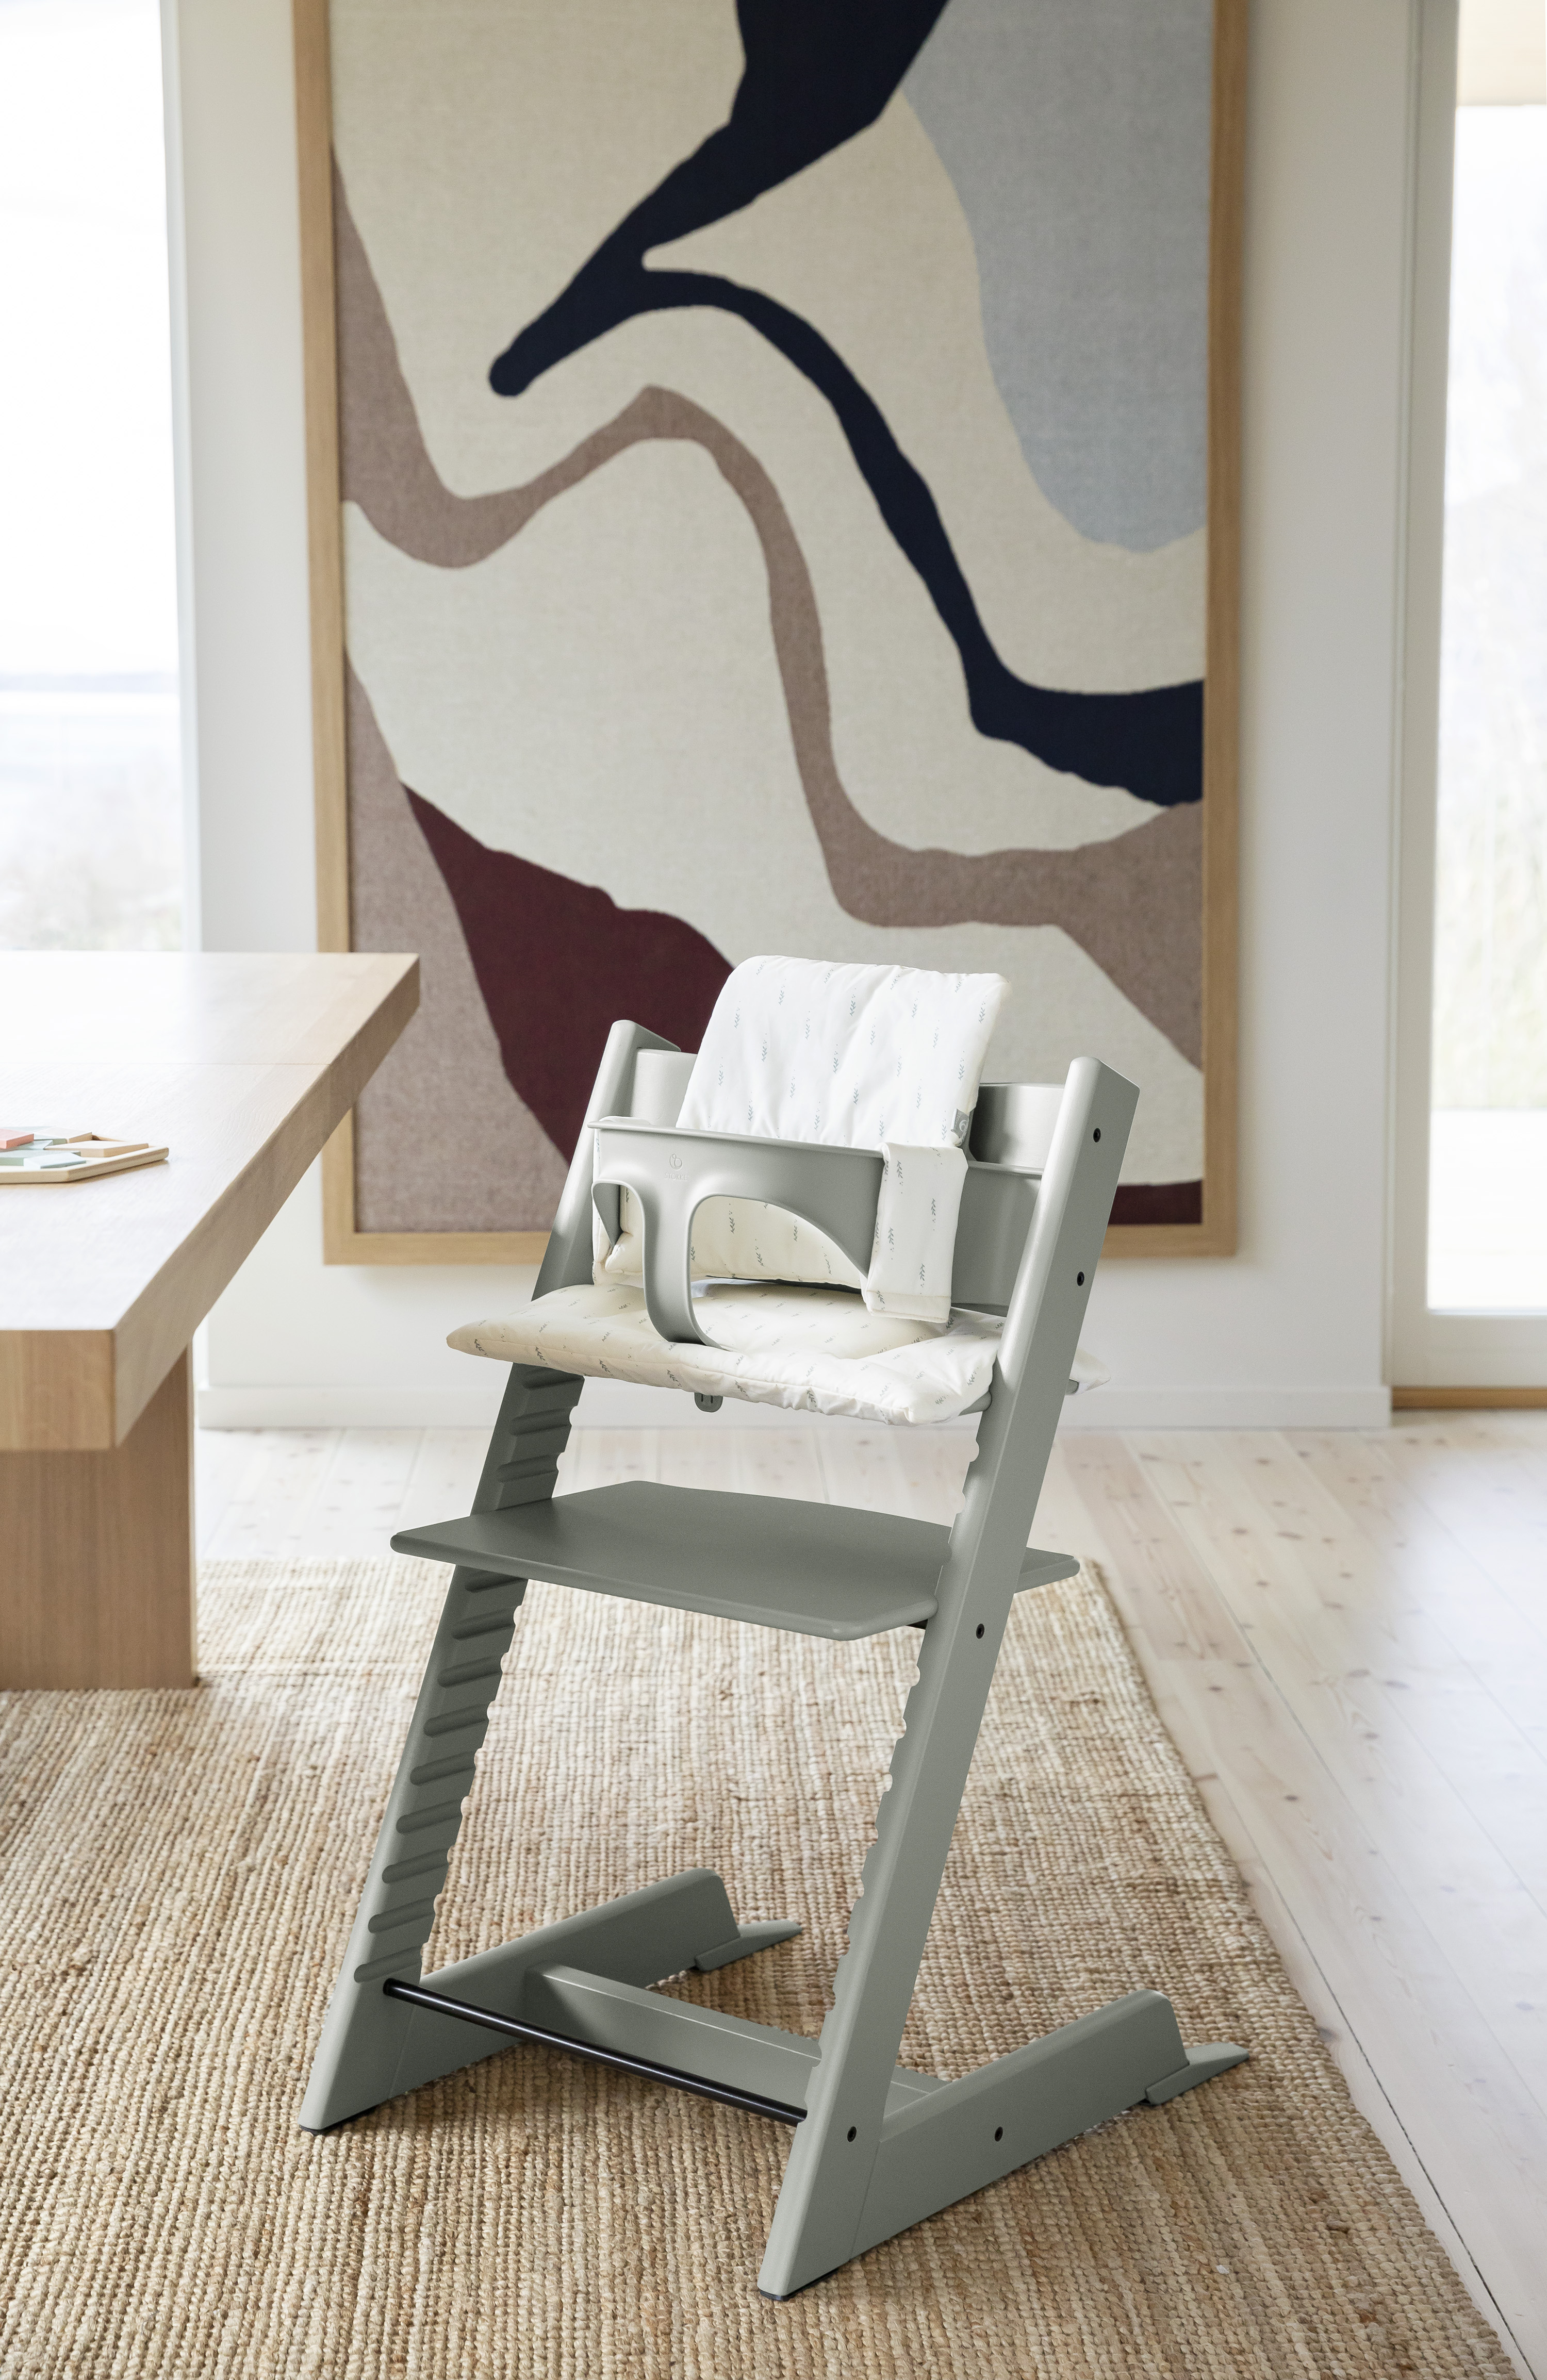 A high chair with a newborn kit, such as the Tripp Trapp from Stokke, grows with your child